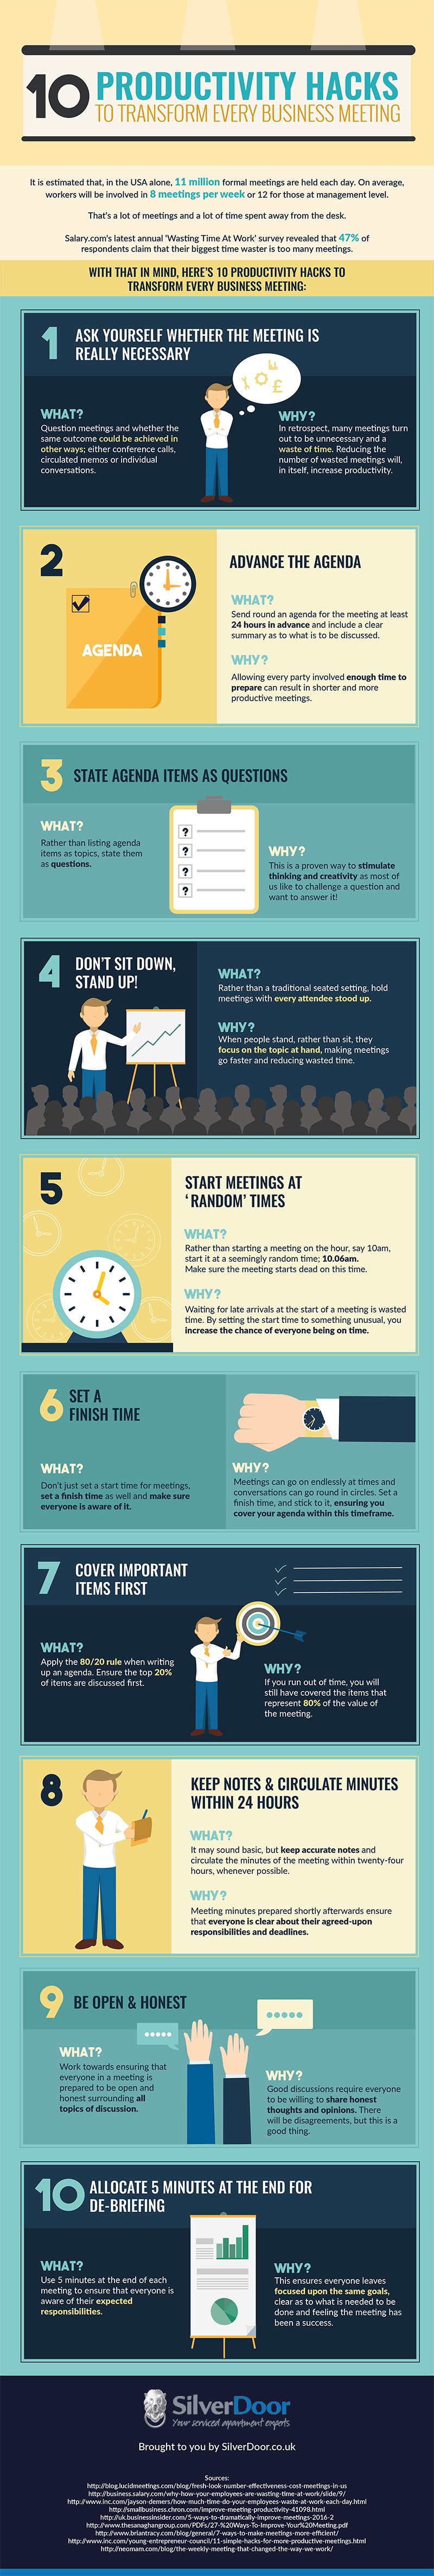 10 Productivity Hacks to Transform Every Business Meeting [Infographic]